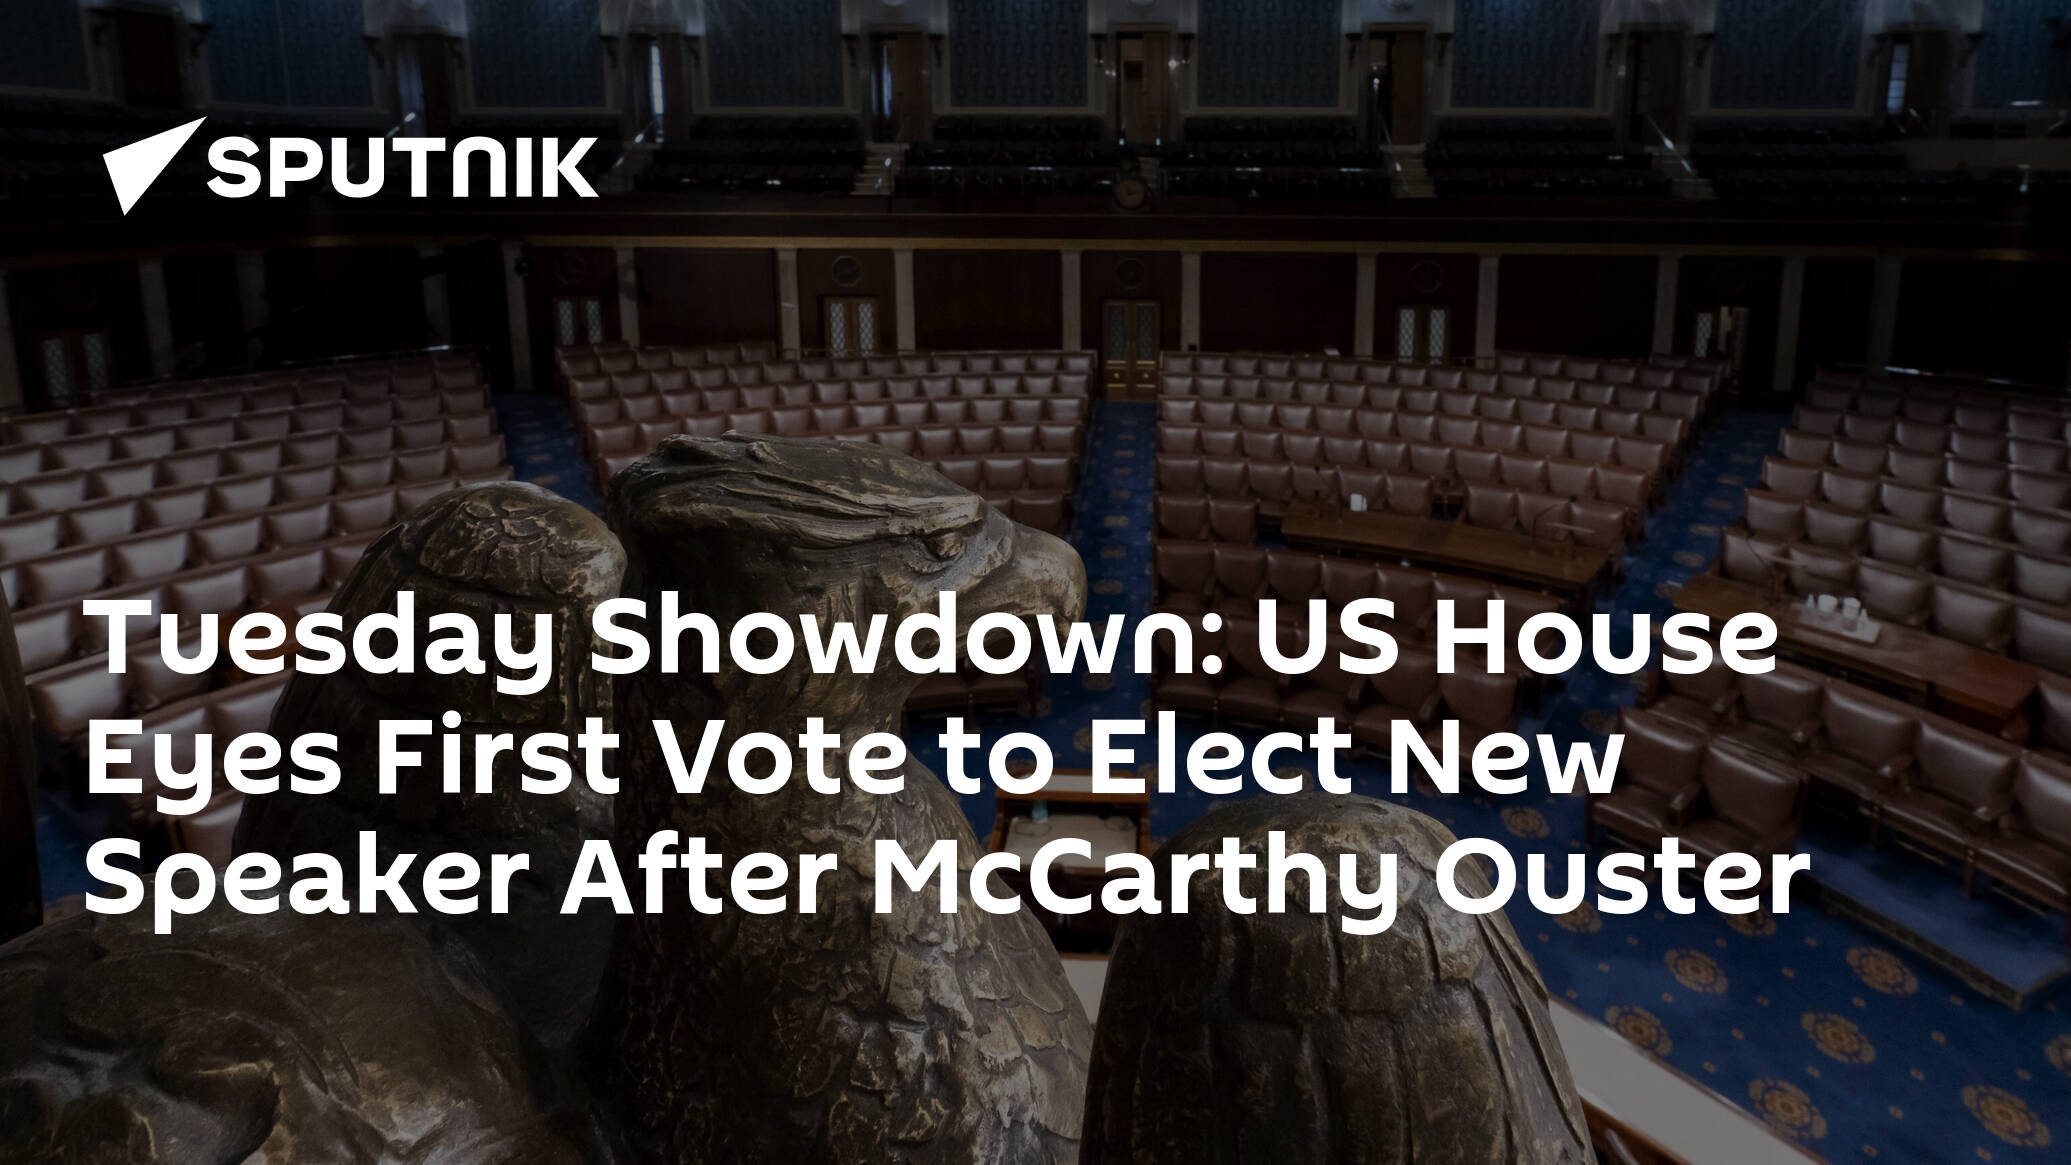 Tuesday Showdown: US House Eyes First Vote to Elect New Speaker After McCarthy Ouster